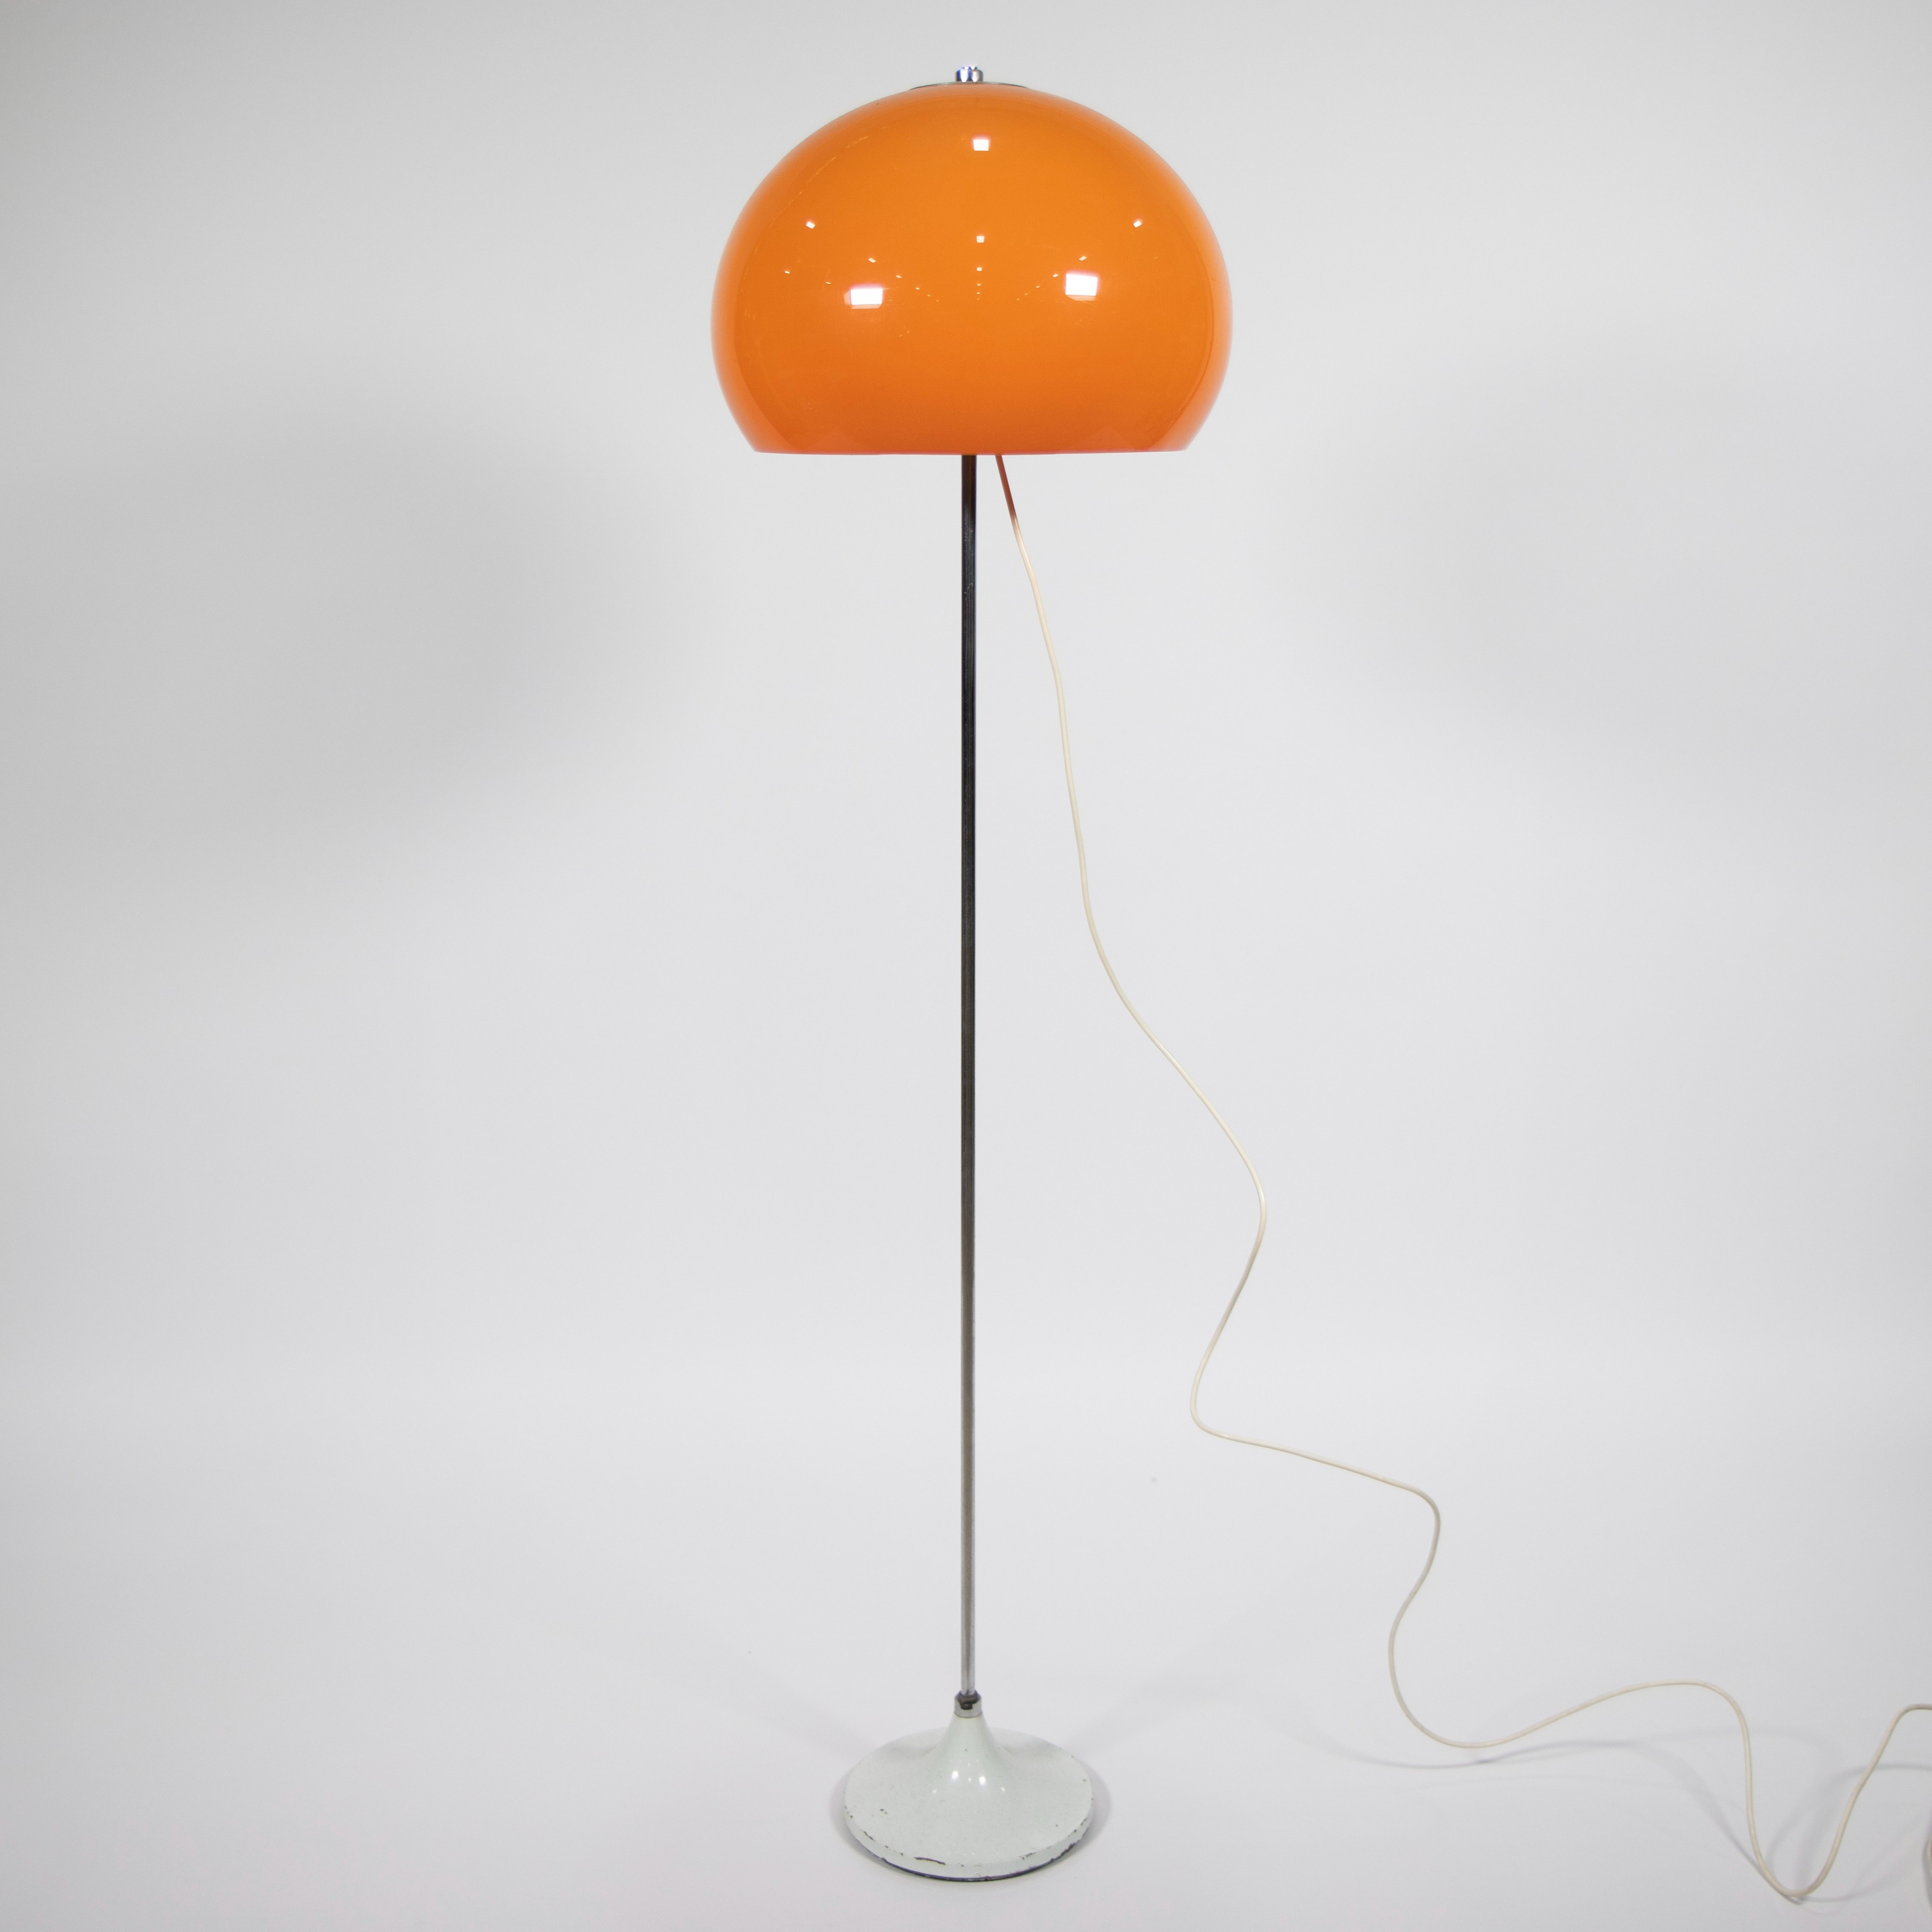 'mushroom' floor lamp probably by Gepo (Amsterdam), 1960s